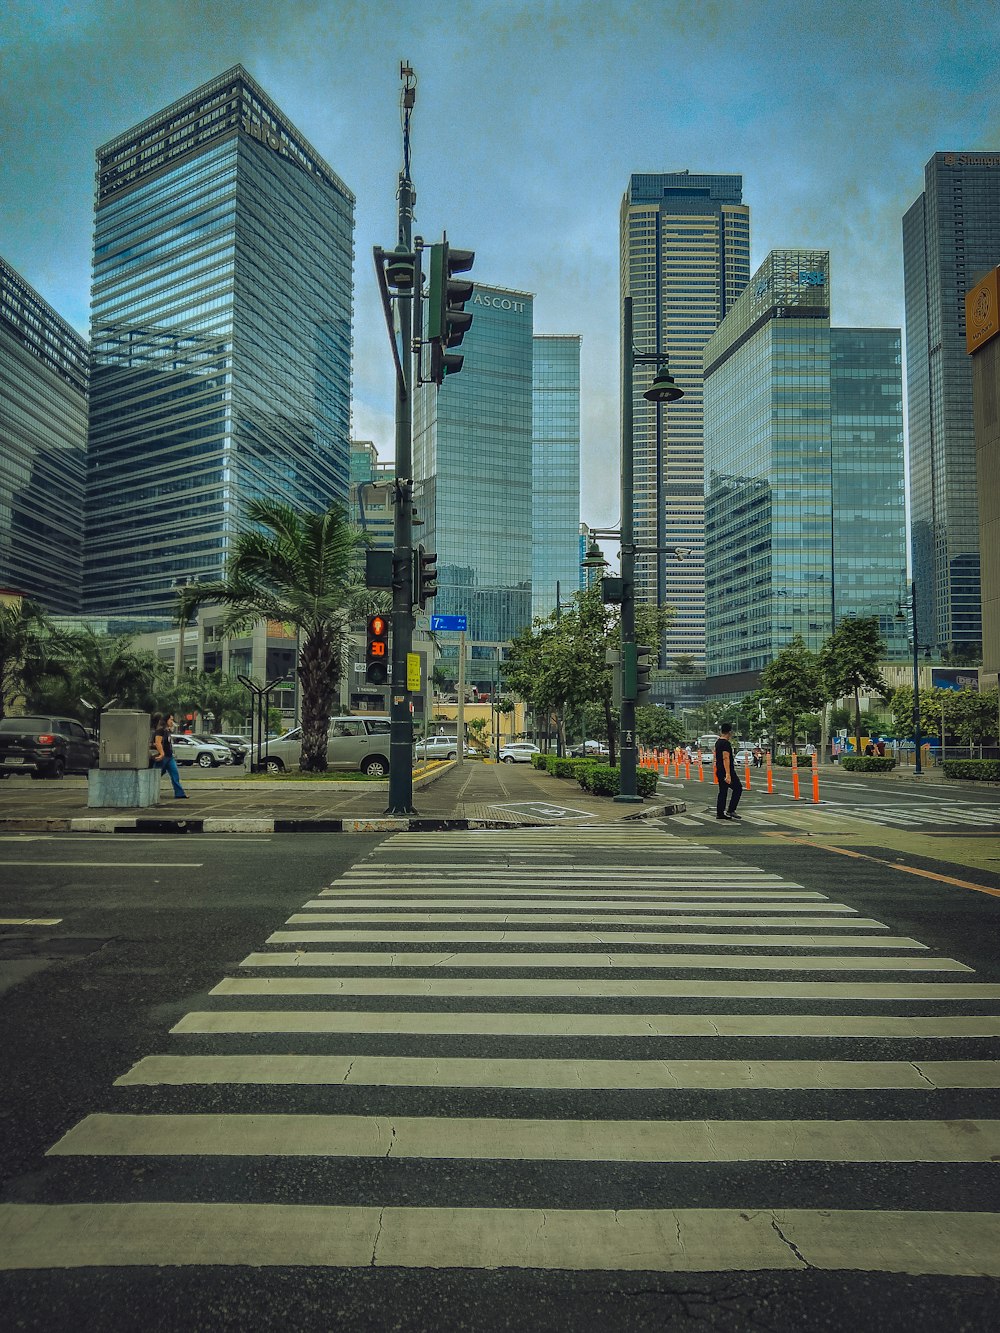 a crosswalk in a city with tall buildings in the background